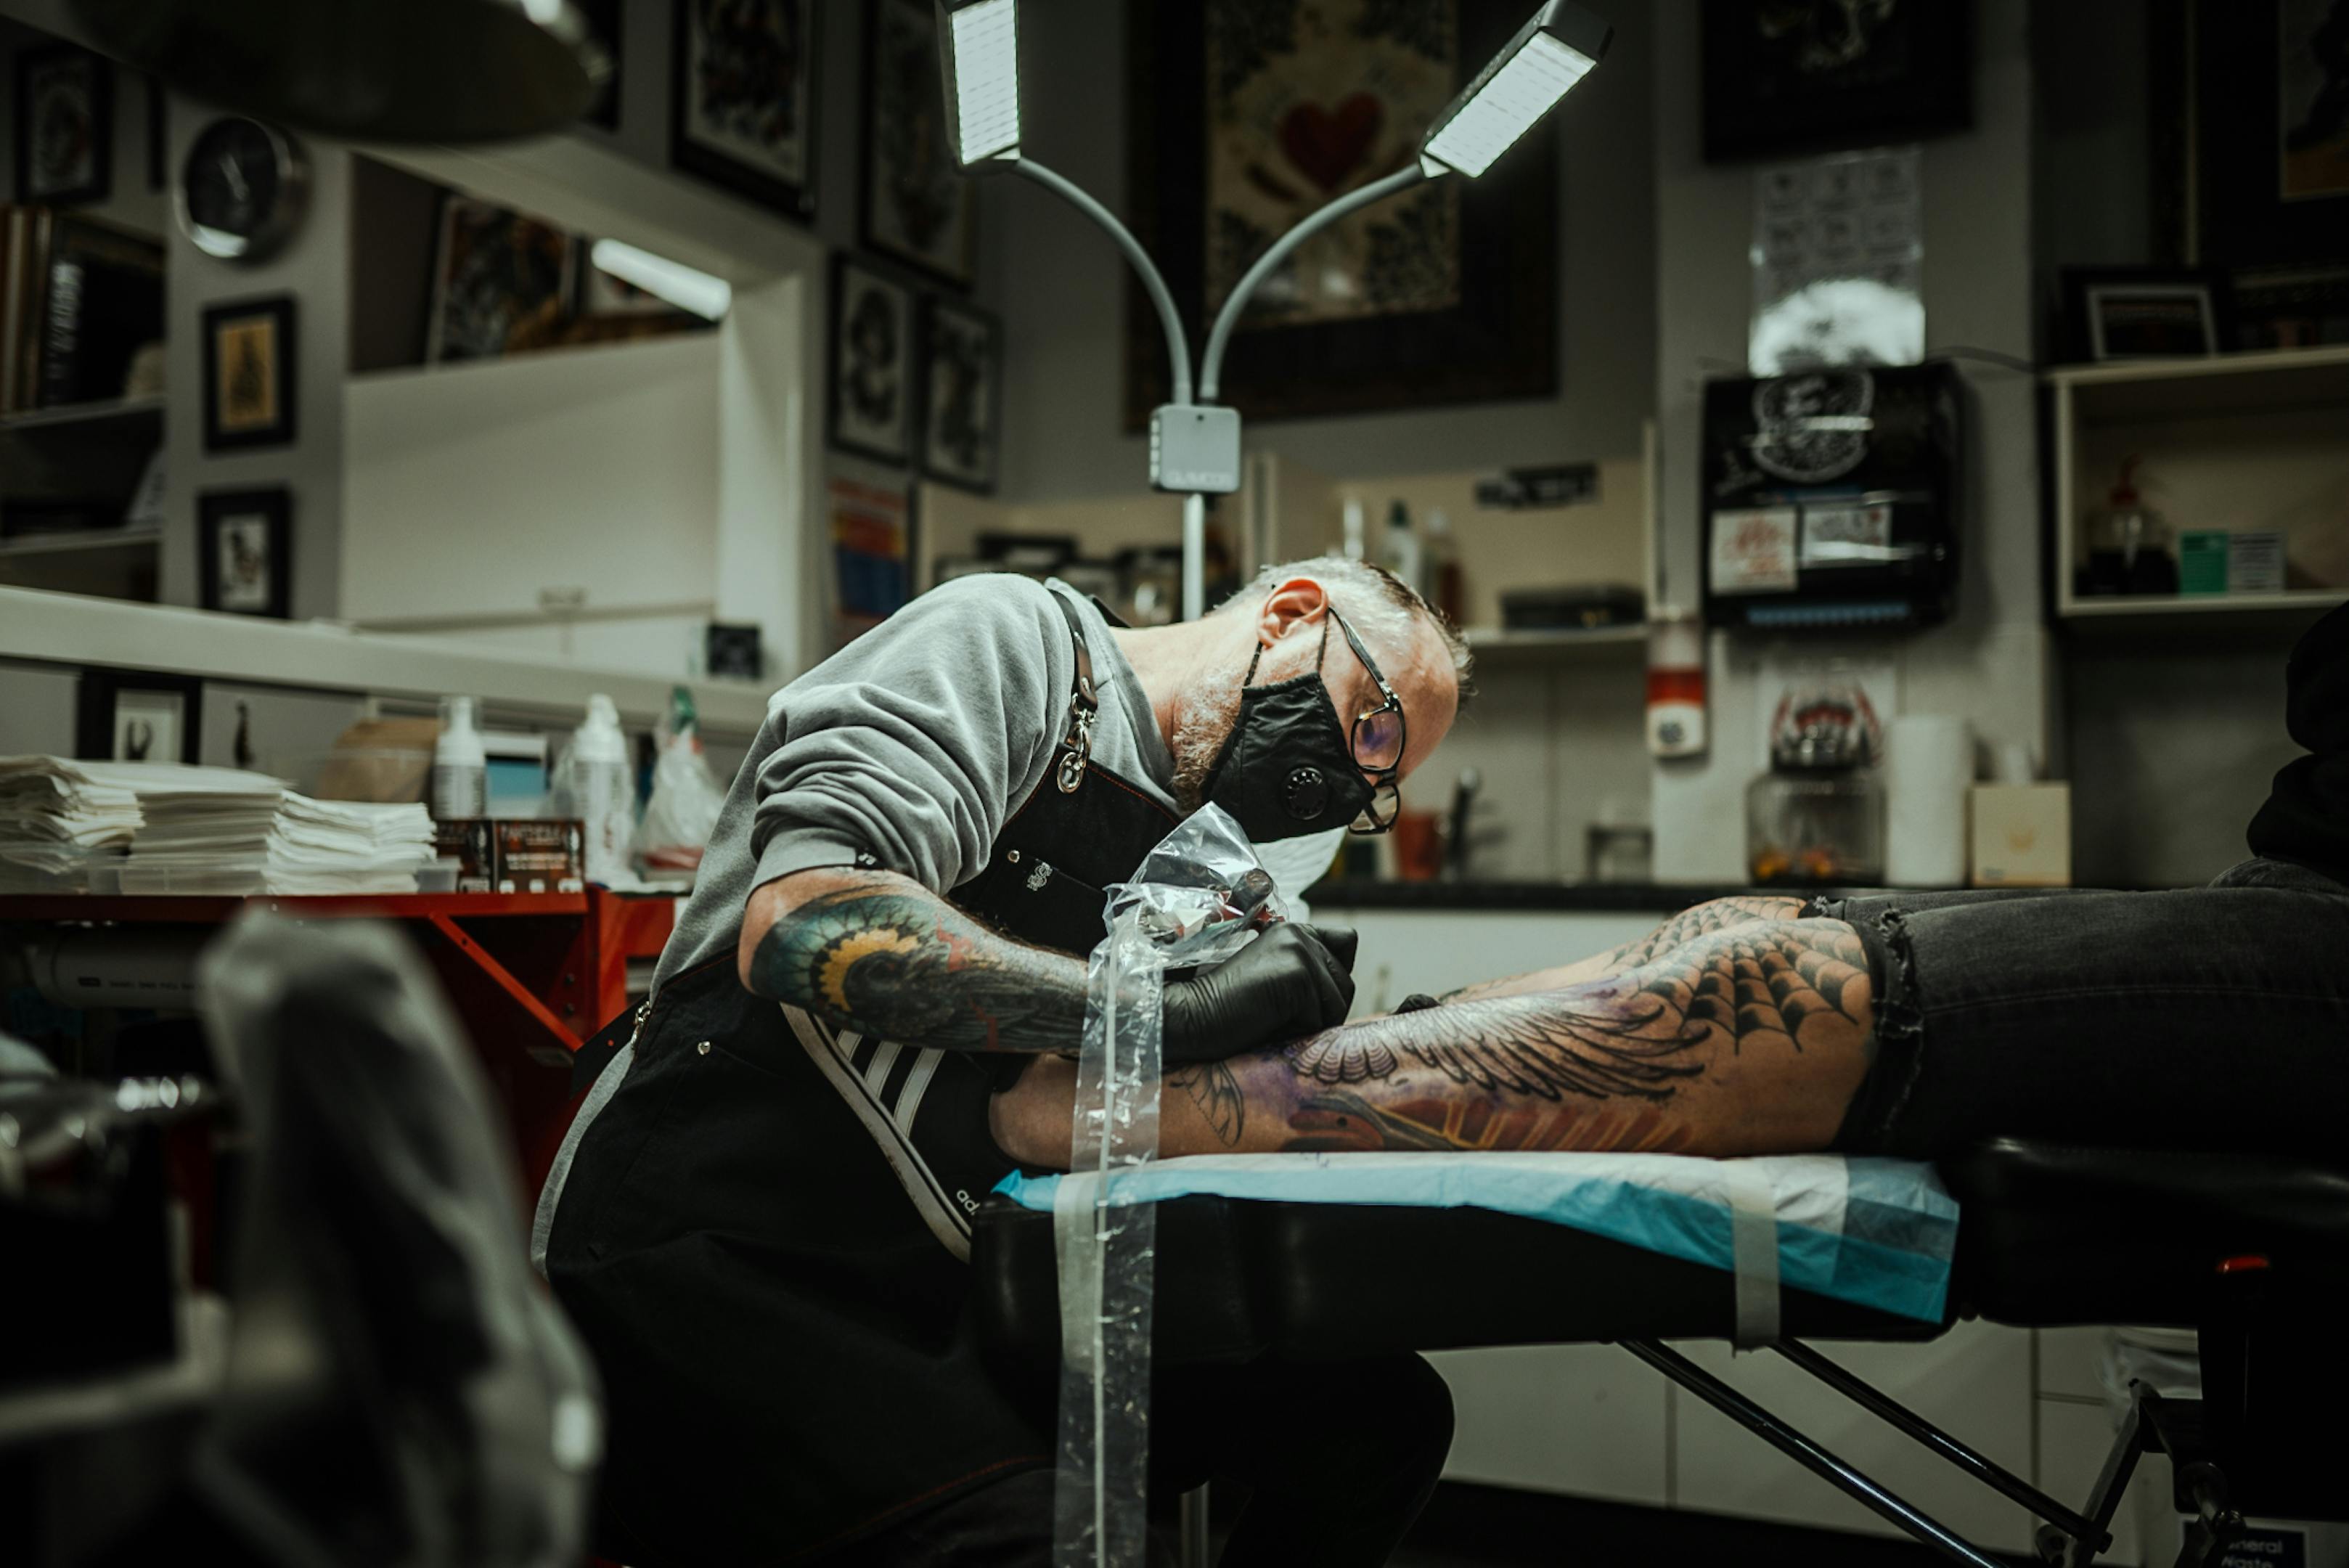 Springfield tattoo artist offers to cover racist tattoos for free